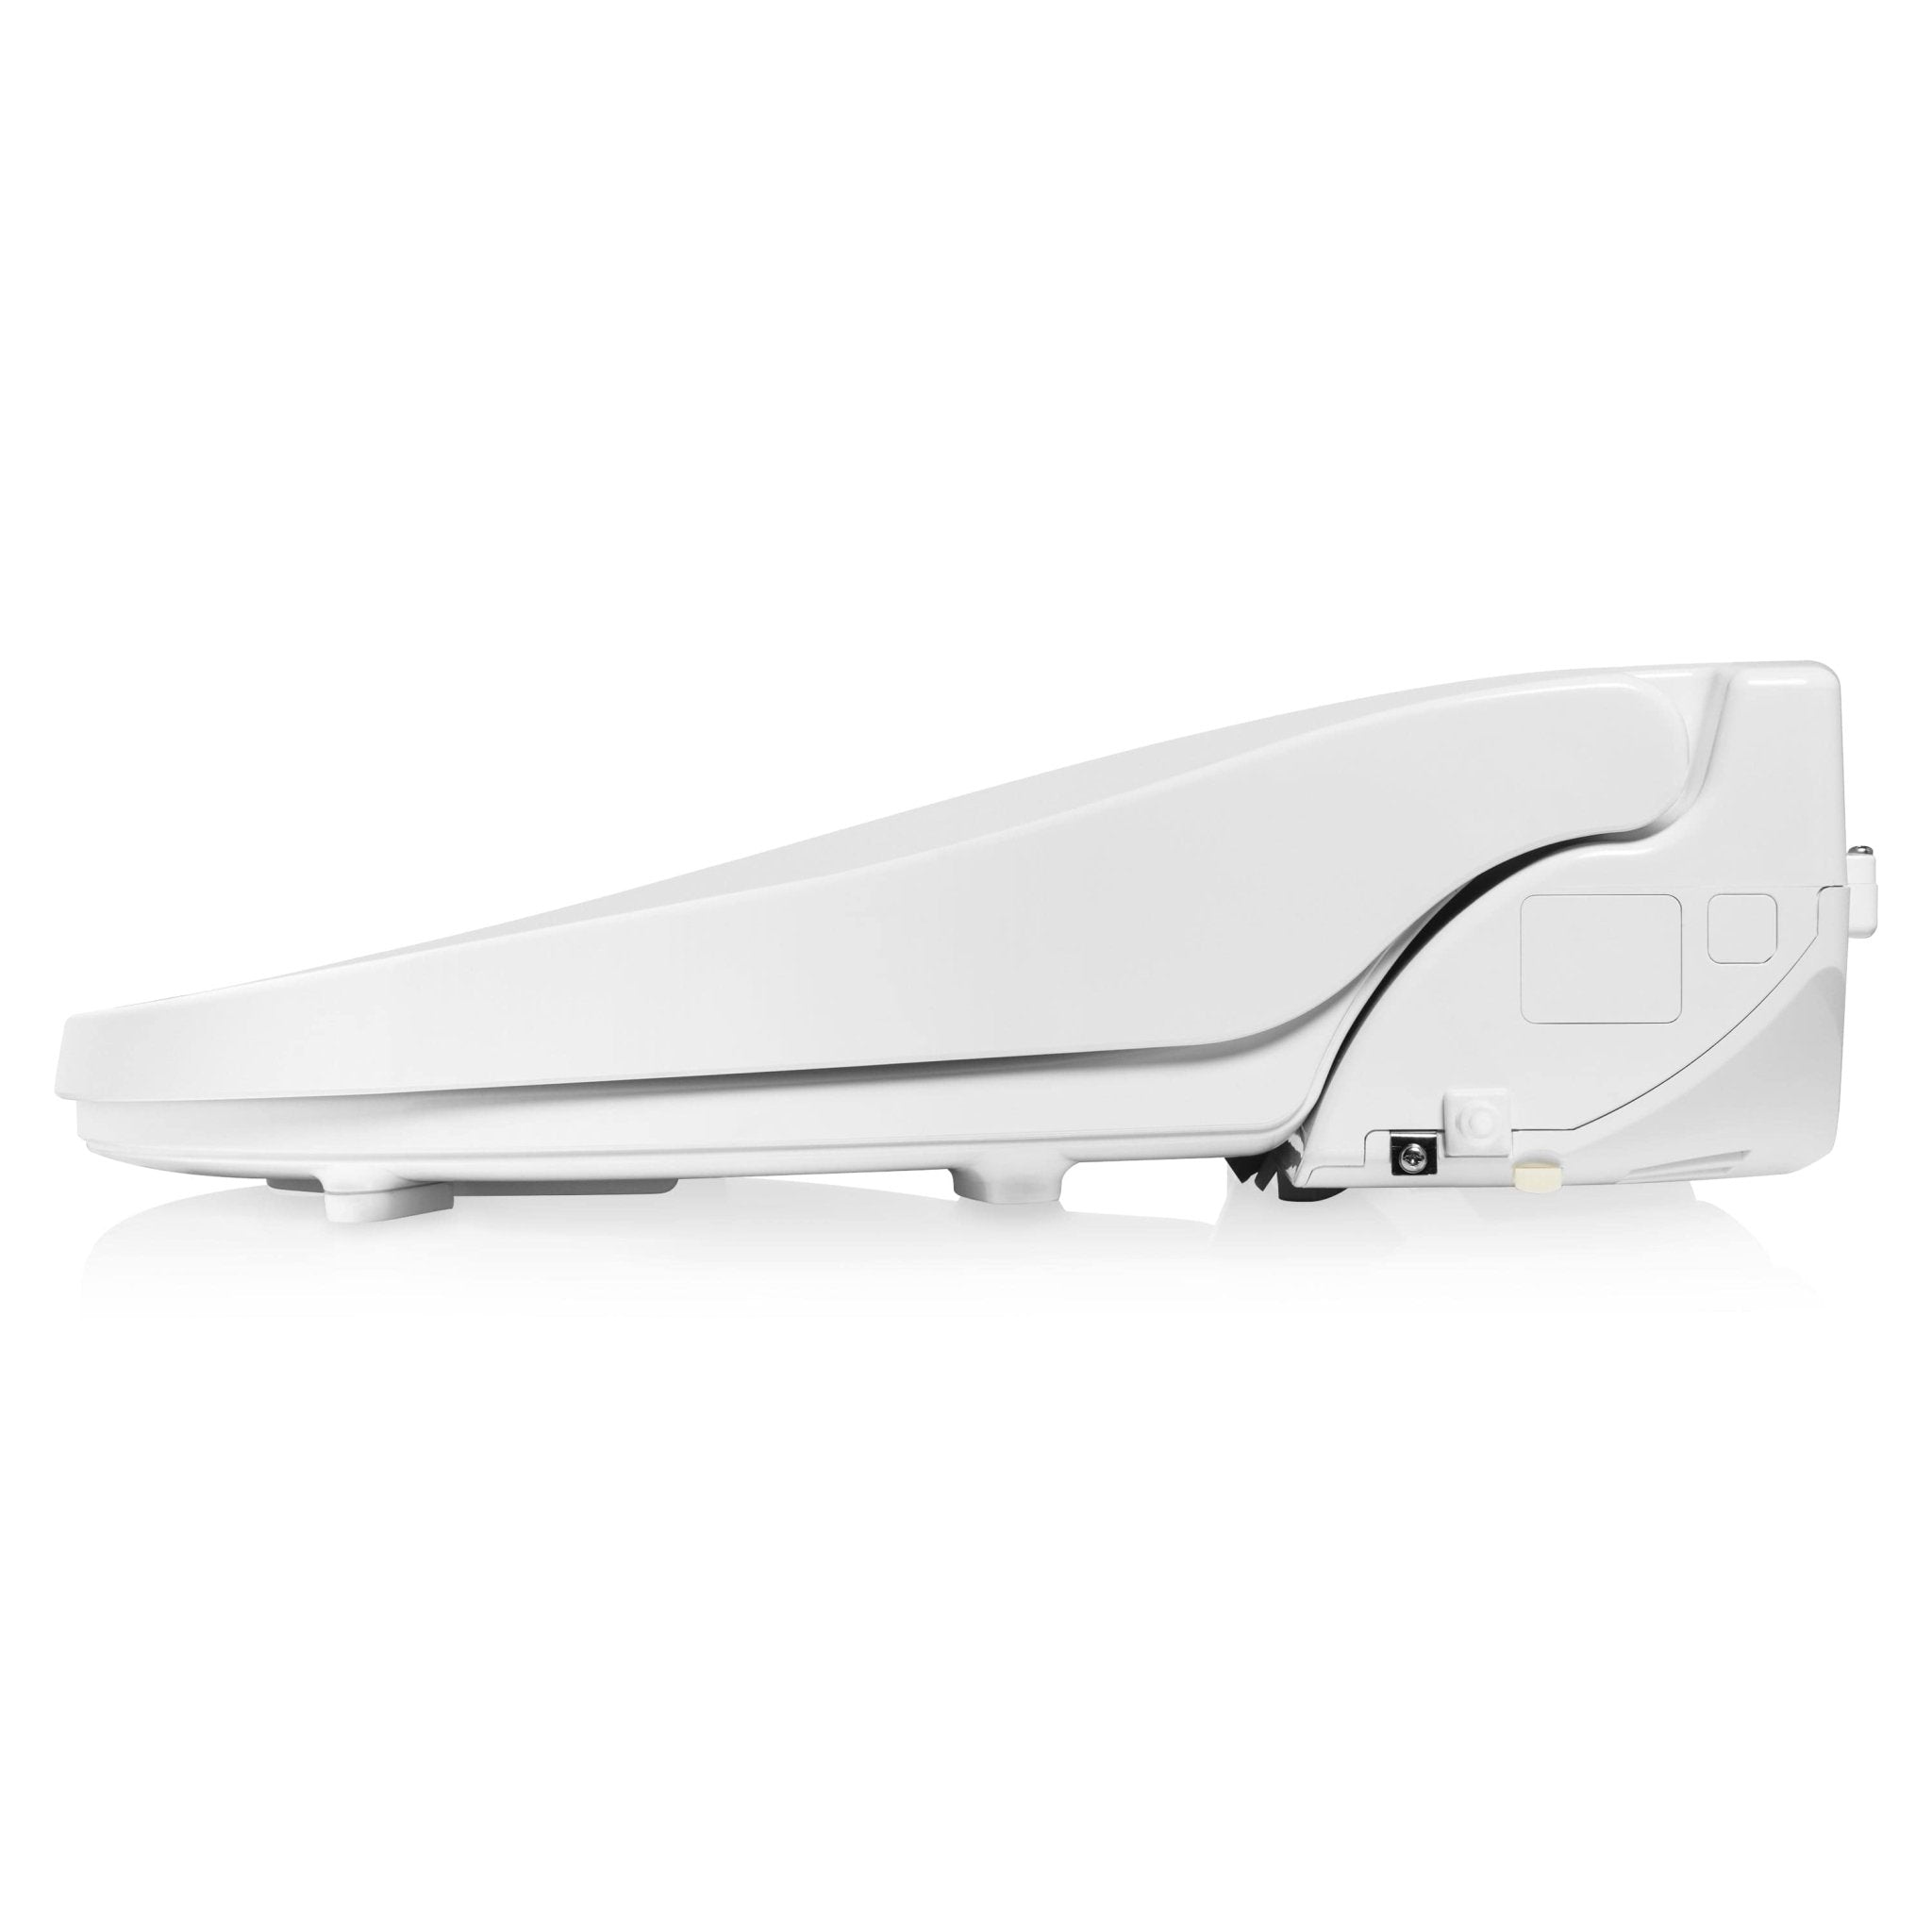 Swash Select DR801 Sidearm Bidet Heated Seat with Warm Air Dryer and Deodorizer, Round White DR801-RW - Molaix - Molaix819911015085SWASH SELECT BIDET SEATSDR801-RW